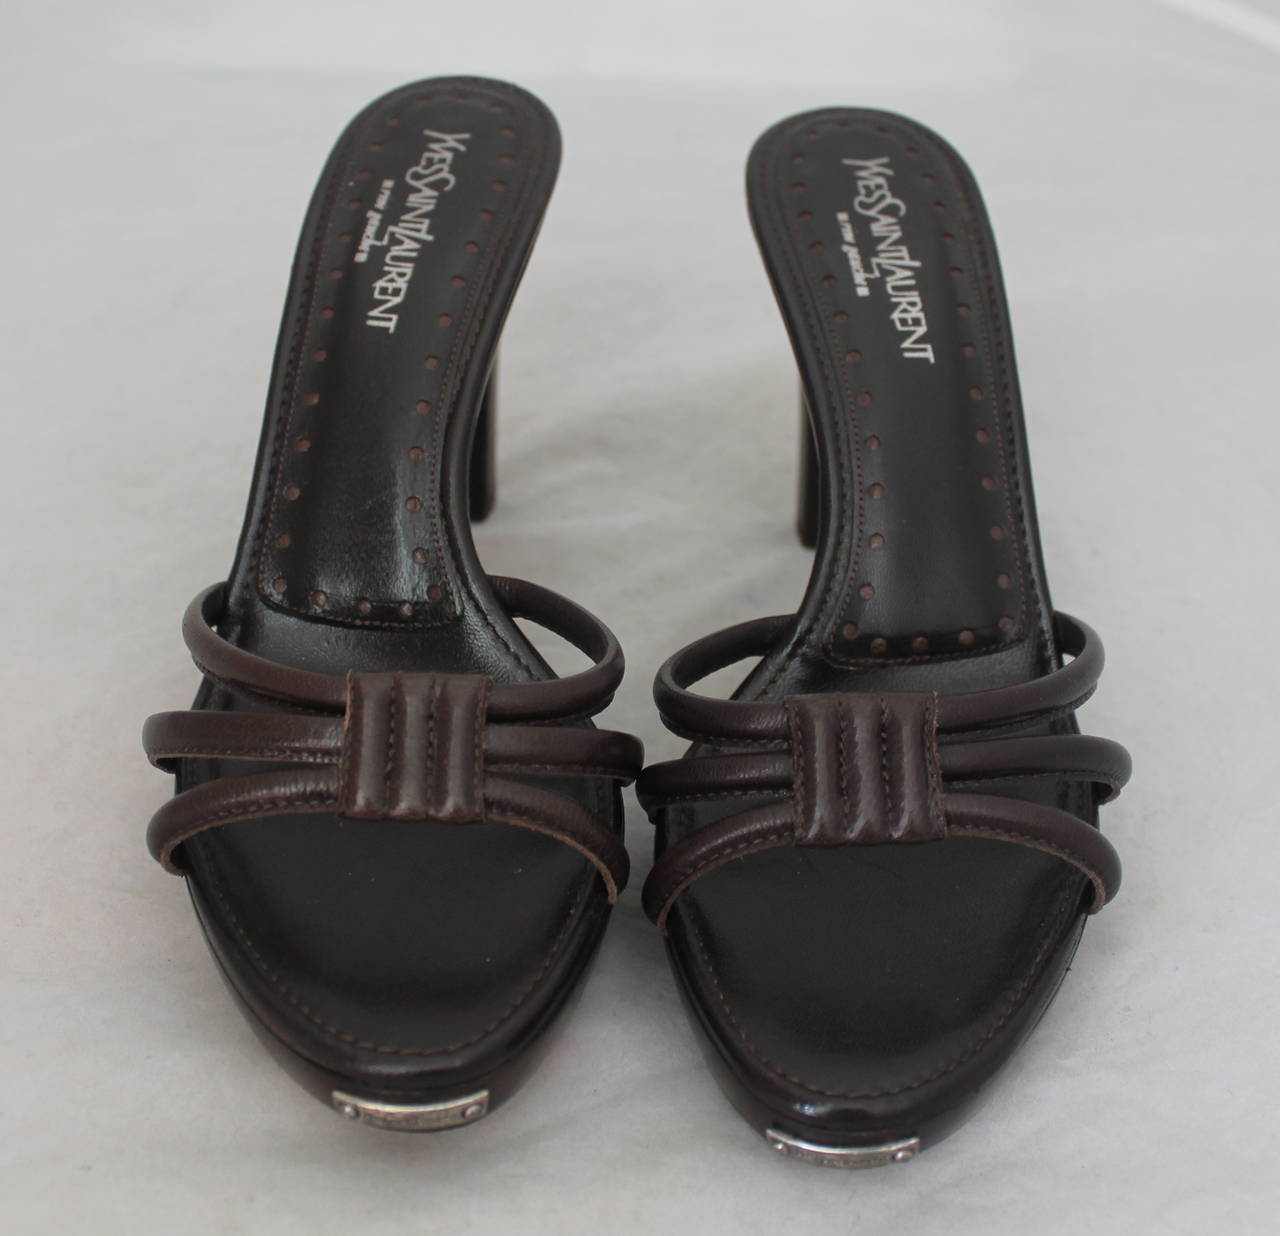 Yves Saint Laurent Chocolate Brown Slide On Leather Sandal Heels. These Size 8 Shoes are in Very Good Condition.